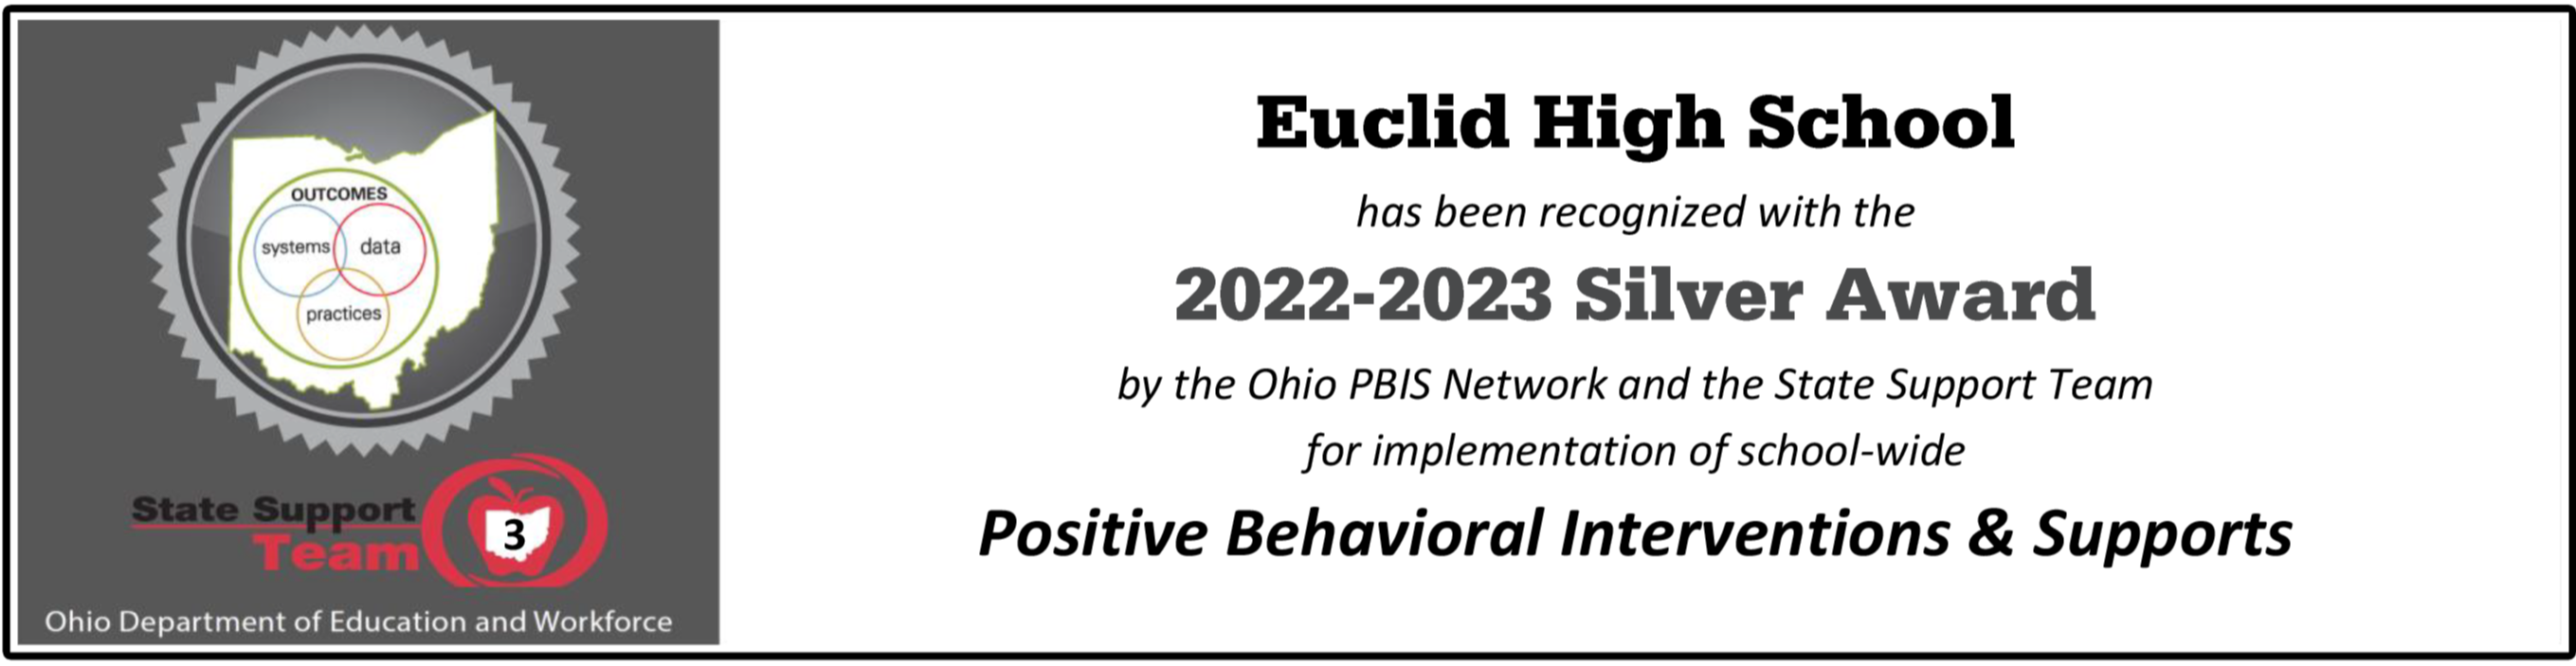 Euclid High School PBIS Silver Recognition